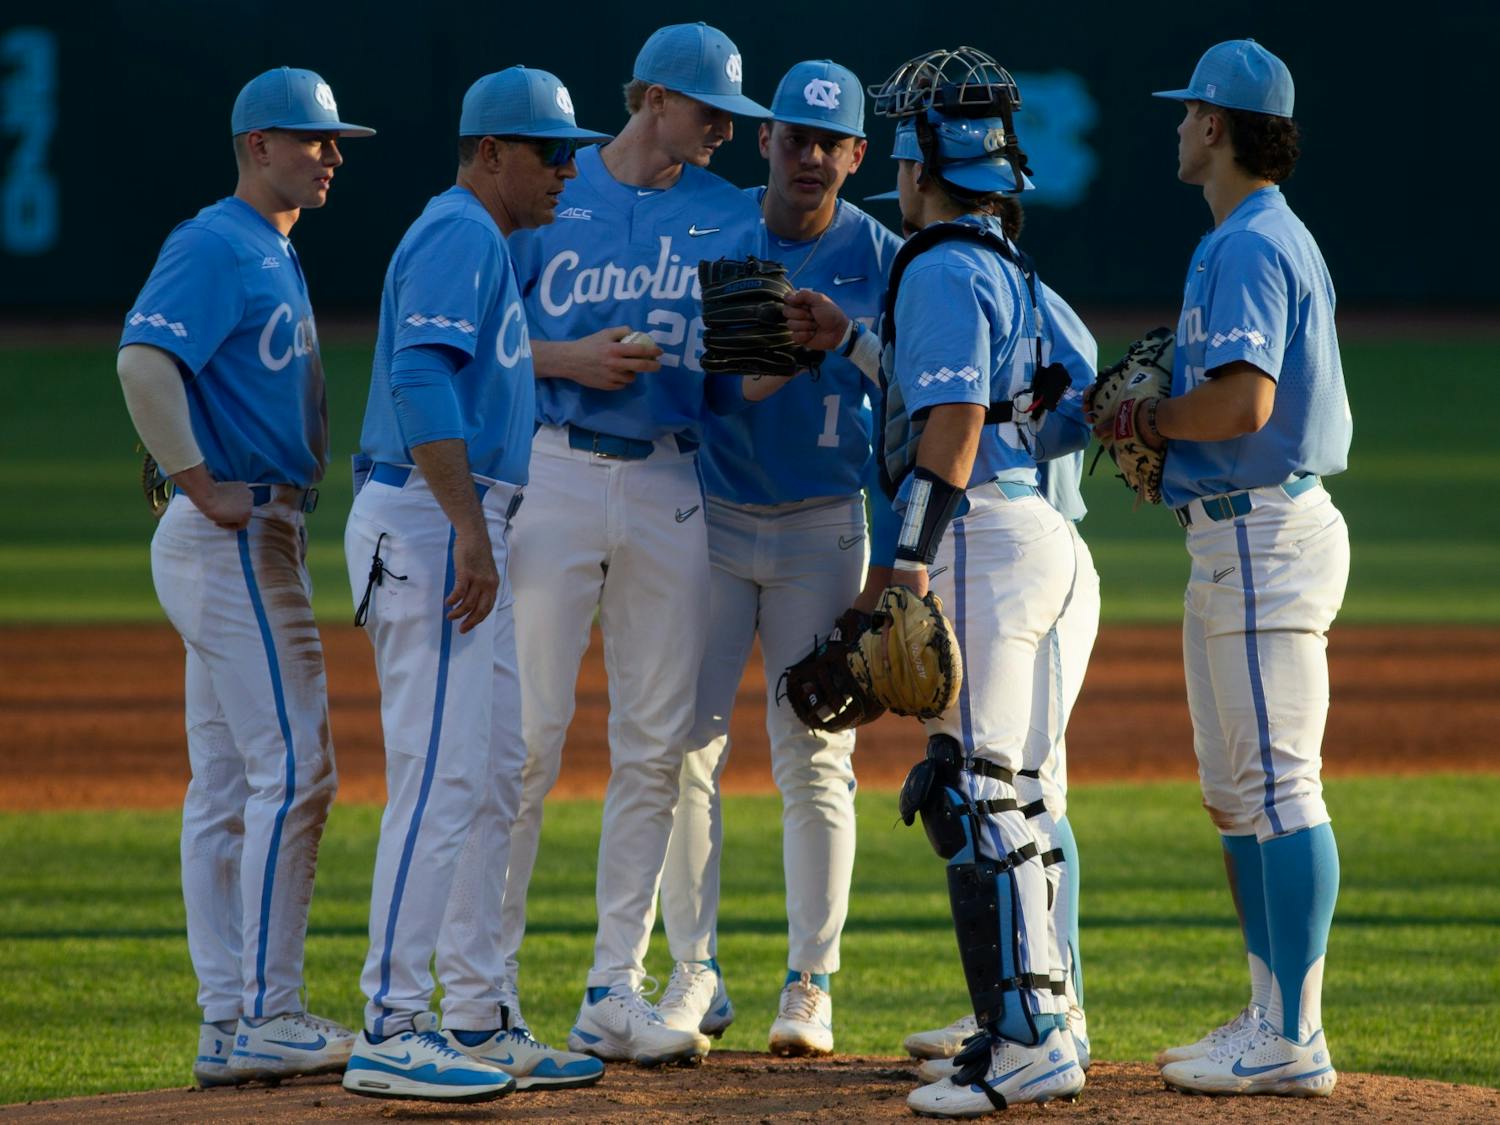 The team meets on the pitcher's mound during a UNC men’s baseball game against Longwood on Tuesday, March 1, 2022, at Boshamer Stadium.